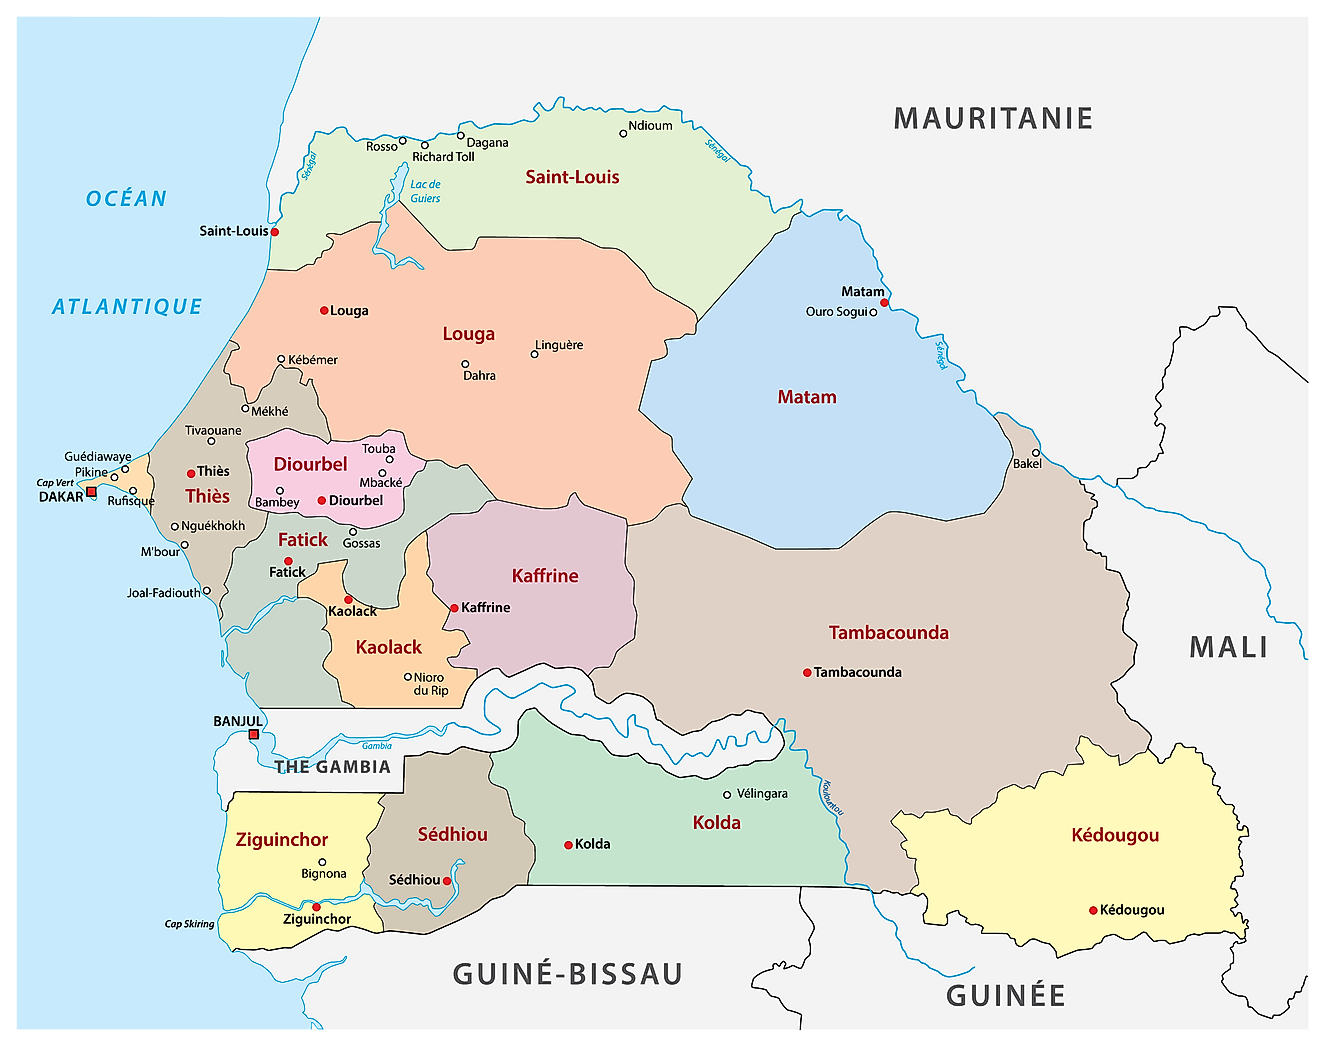 Political Map of Senegal displaying the fourteen regions, their capitals, and the national capital of Dakar.